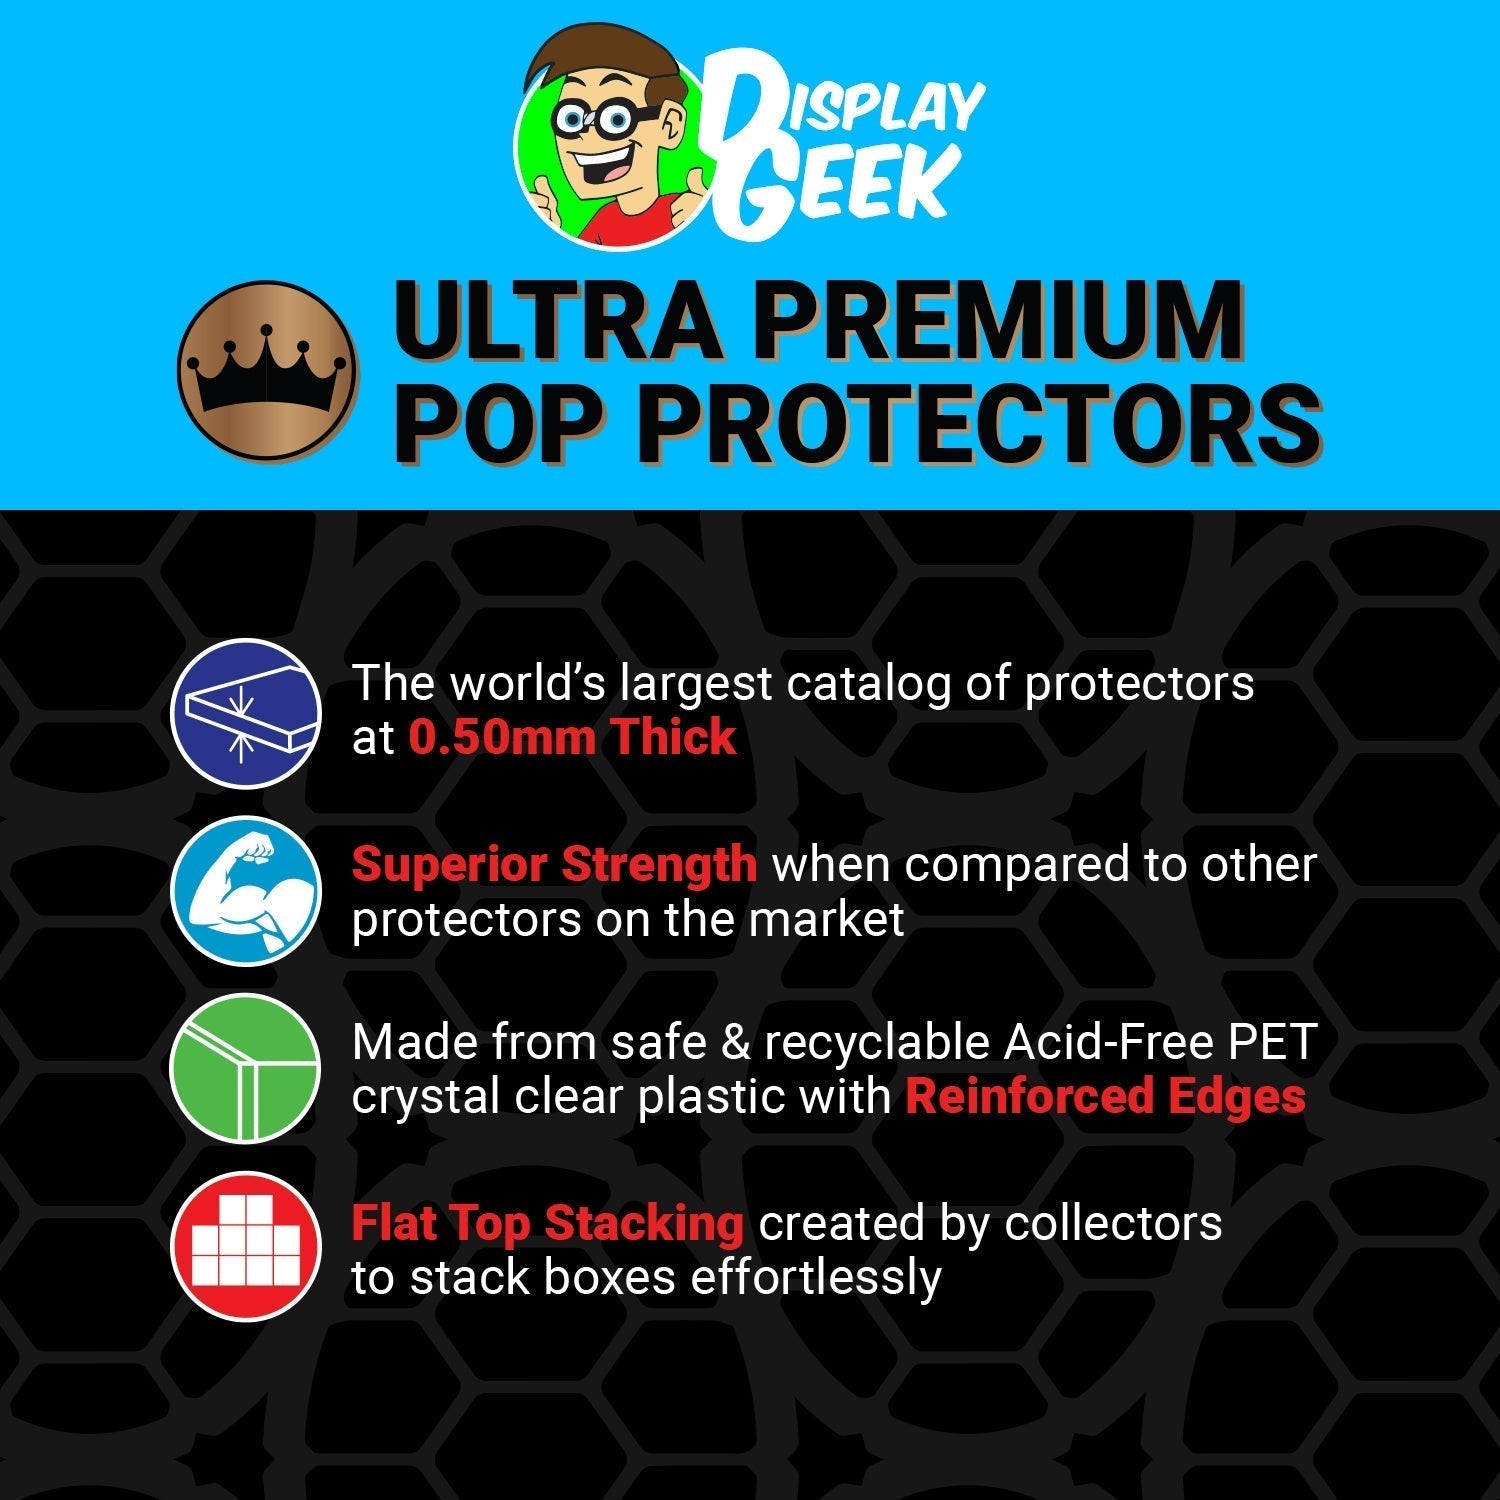 Pop Protector for Elliot & E.T. Glow #1259 Funko Pop Moment - PPG Pop Protector Guide Search Created by Display Geek